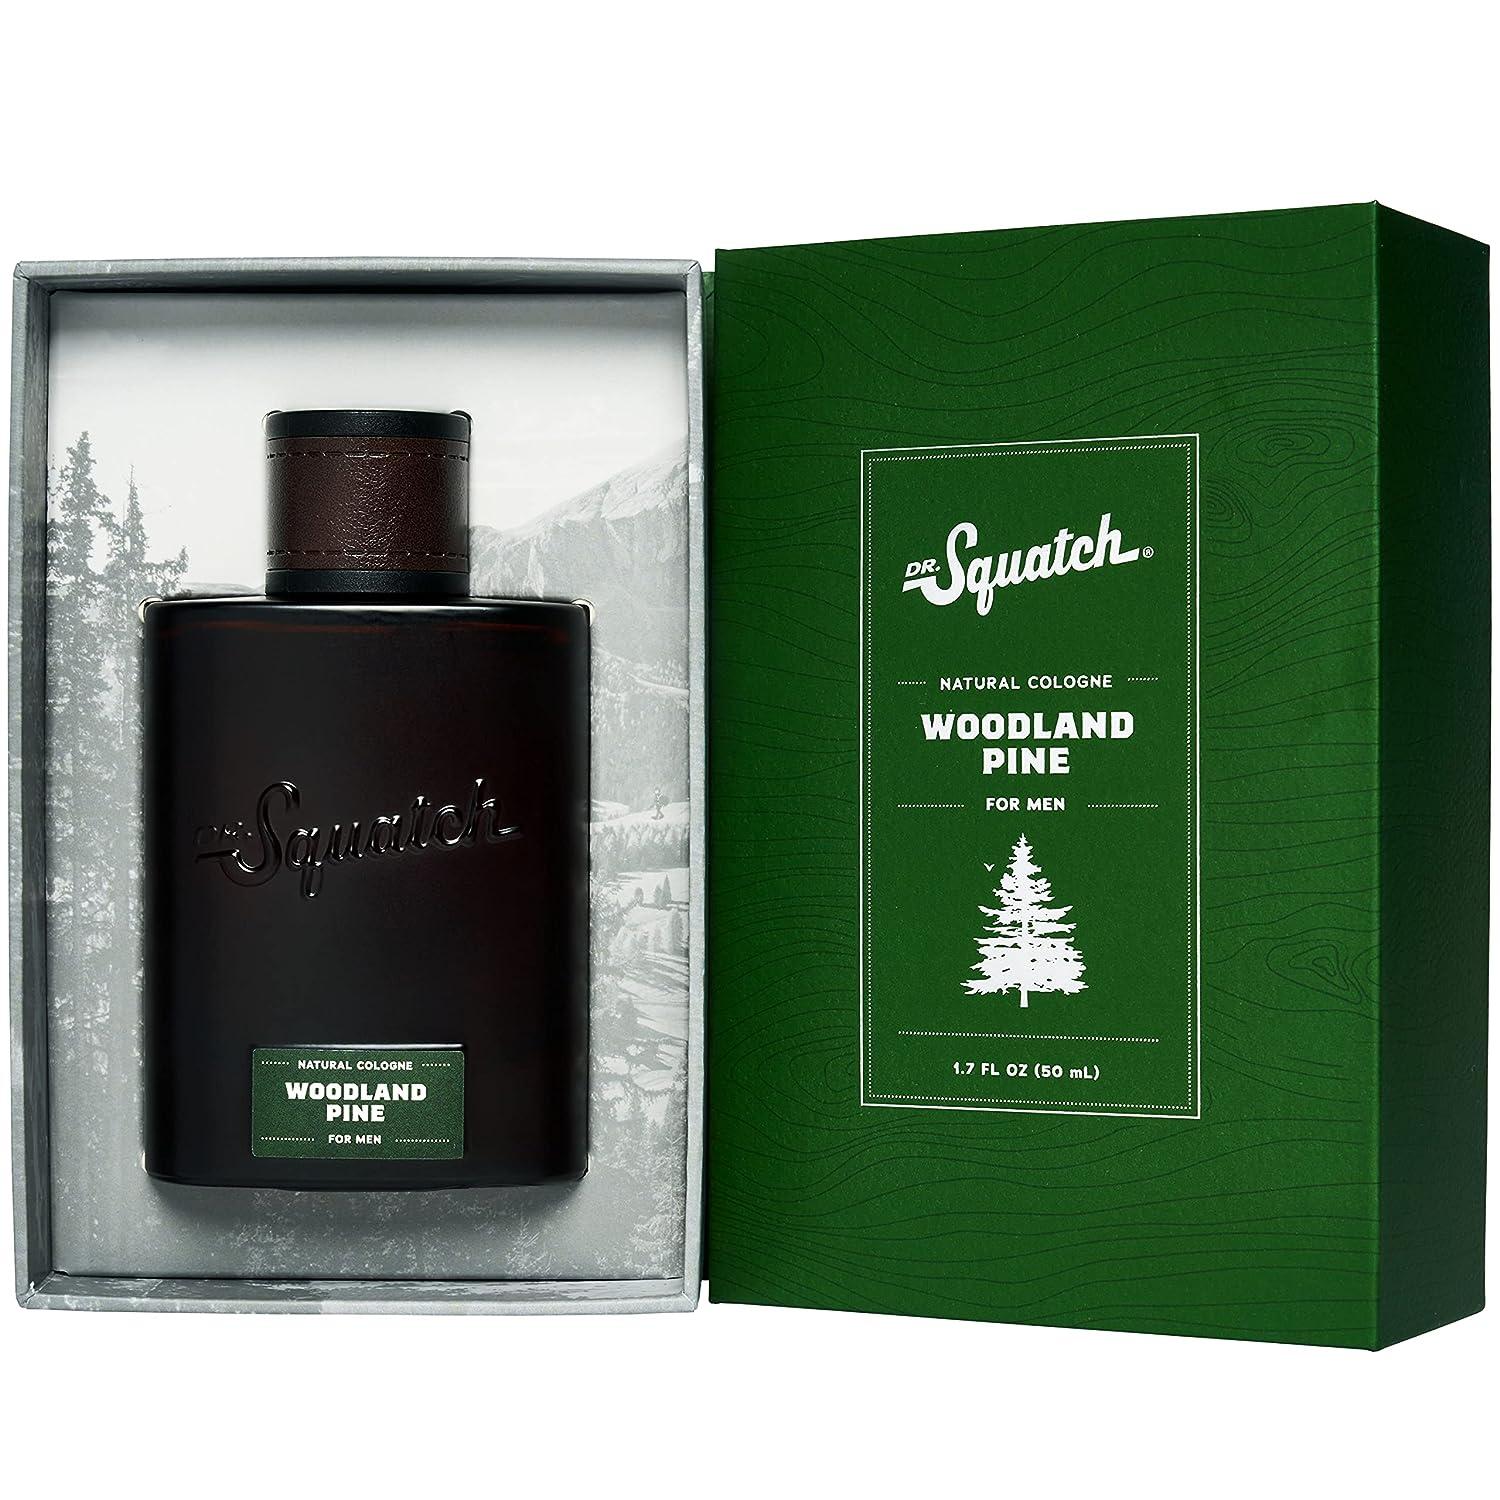 Bath & Body Gifts, Soaps & Lotions, The Woods Gifts MN - Dr. Squatch, Men's Personal Care